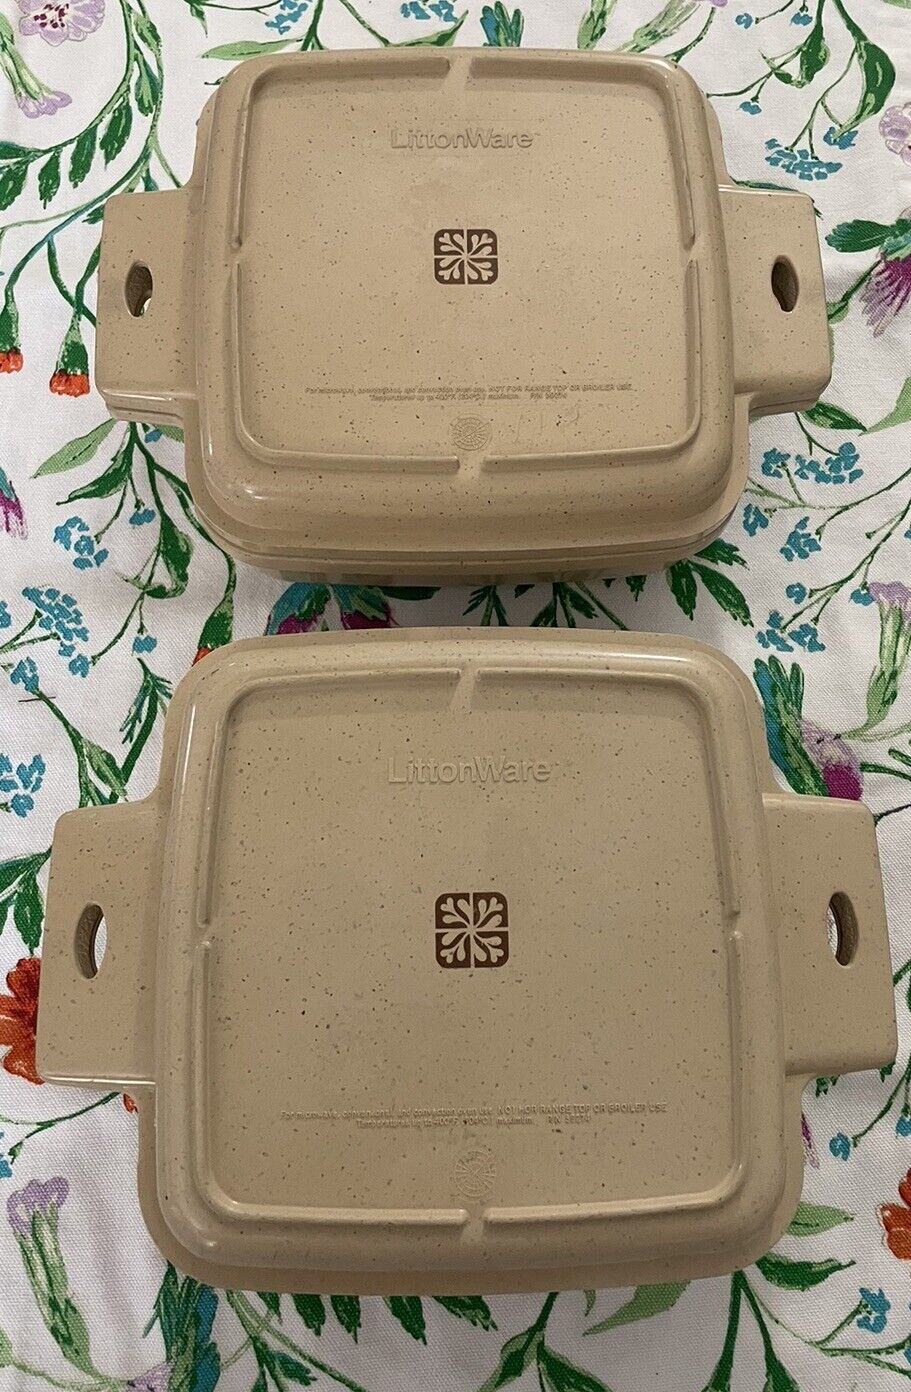 Vintage LittonWare Microwave Cookware 1 Quart Casserole w/ Divided Lid Lot Of 2